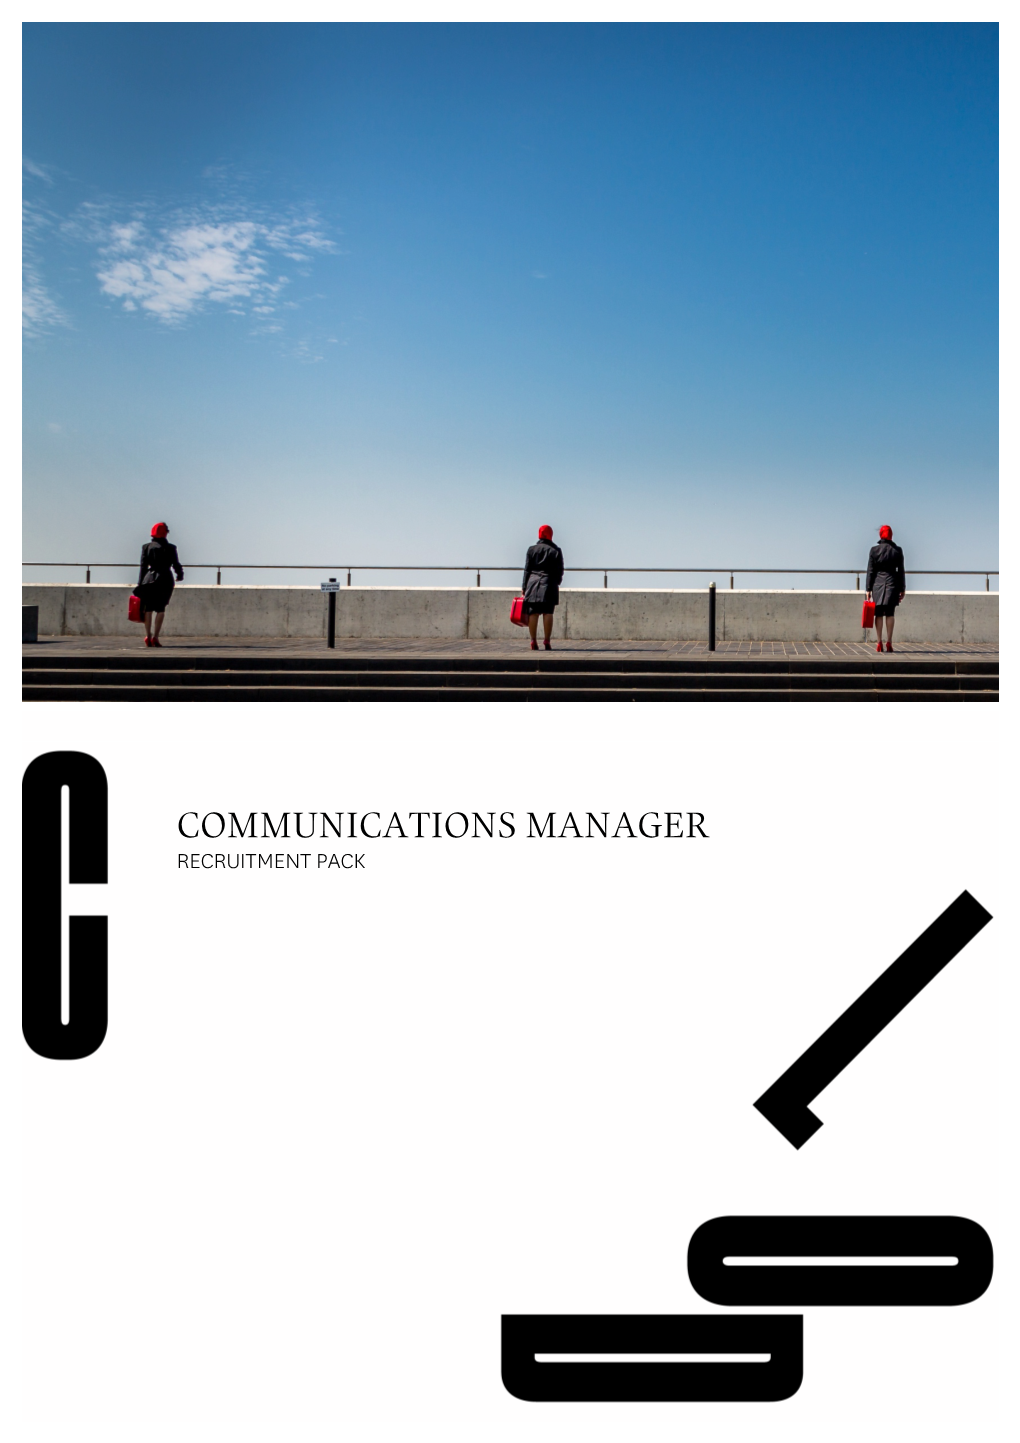 Communications Manager Recruitment Pack